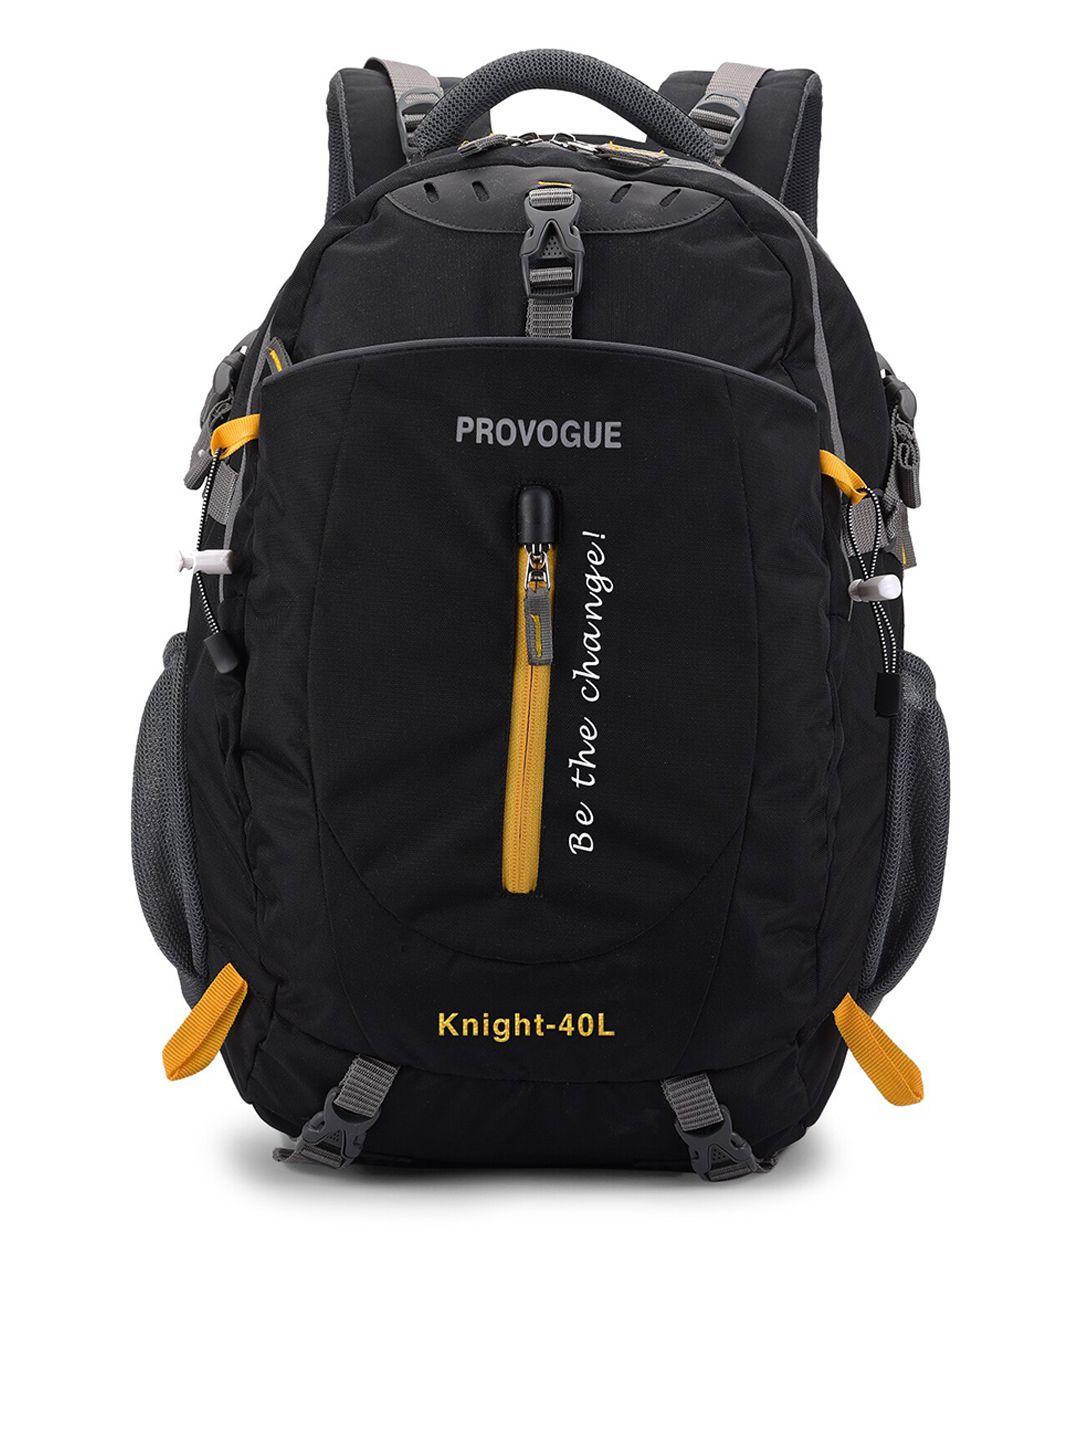 Provogue Unisex Black & Yellow Backpack with Hip Strap & Rain Cover Price in India